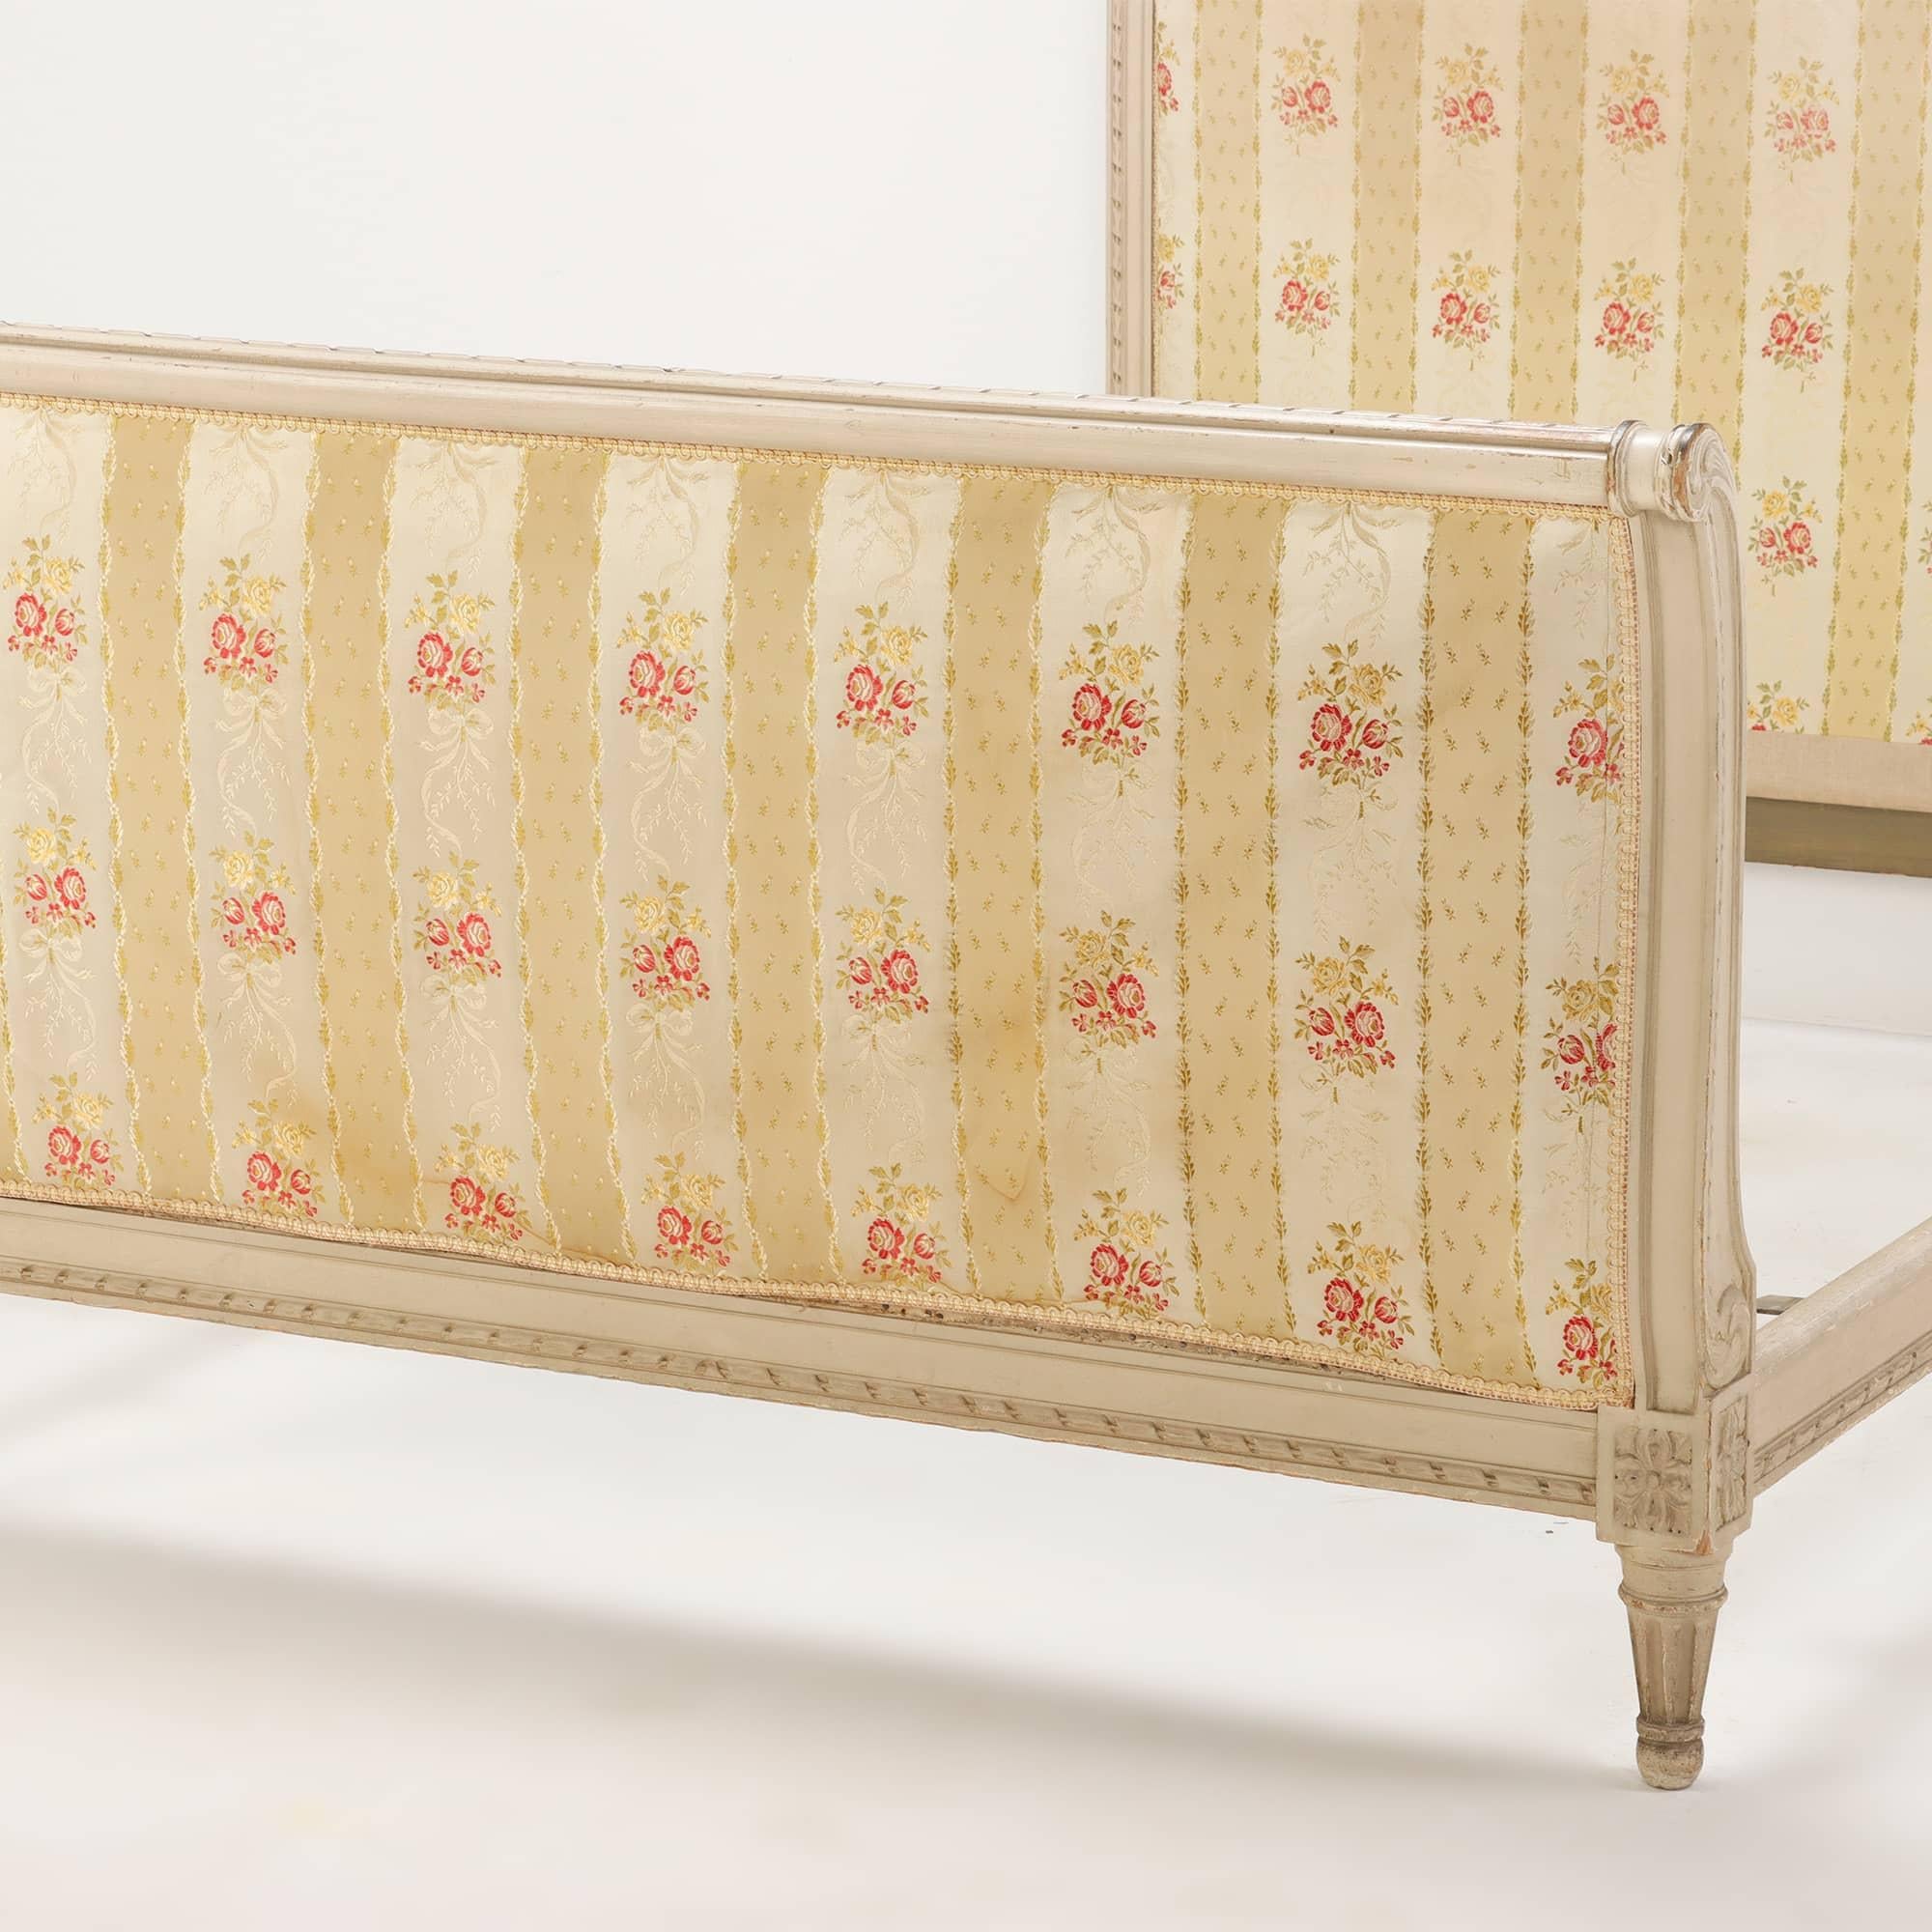 Upholstery French Louis XVI style painted bed circa 1920.